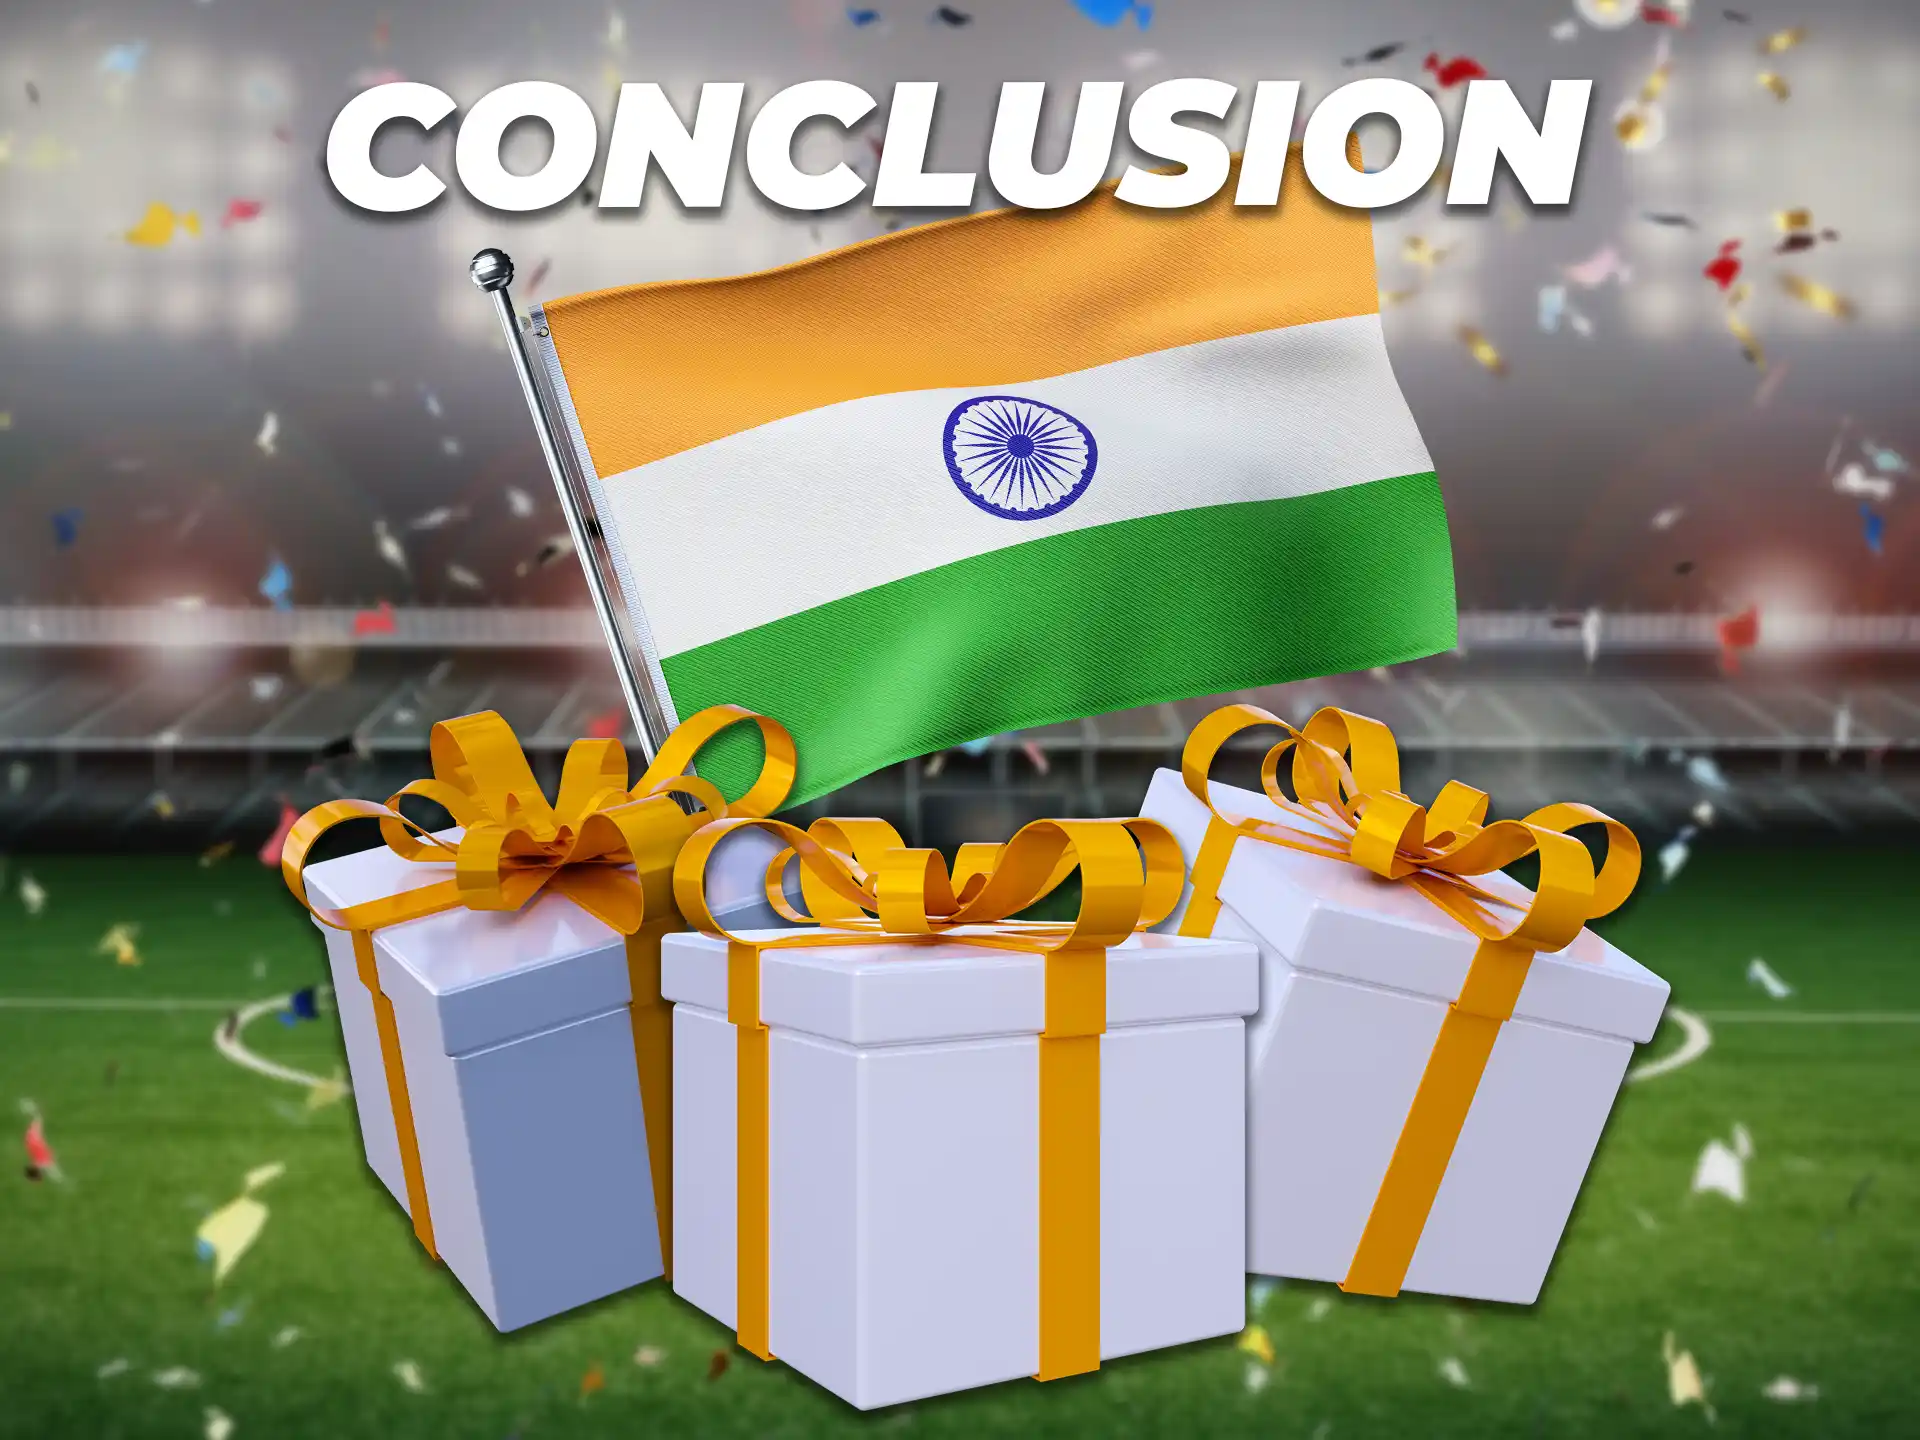 Indian players can increase their profits by taking advantage of the listed bonuses.